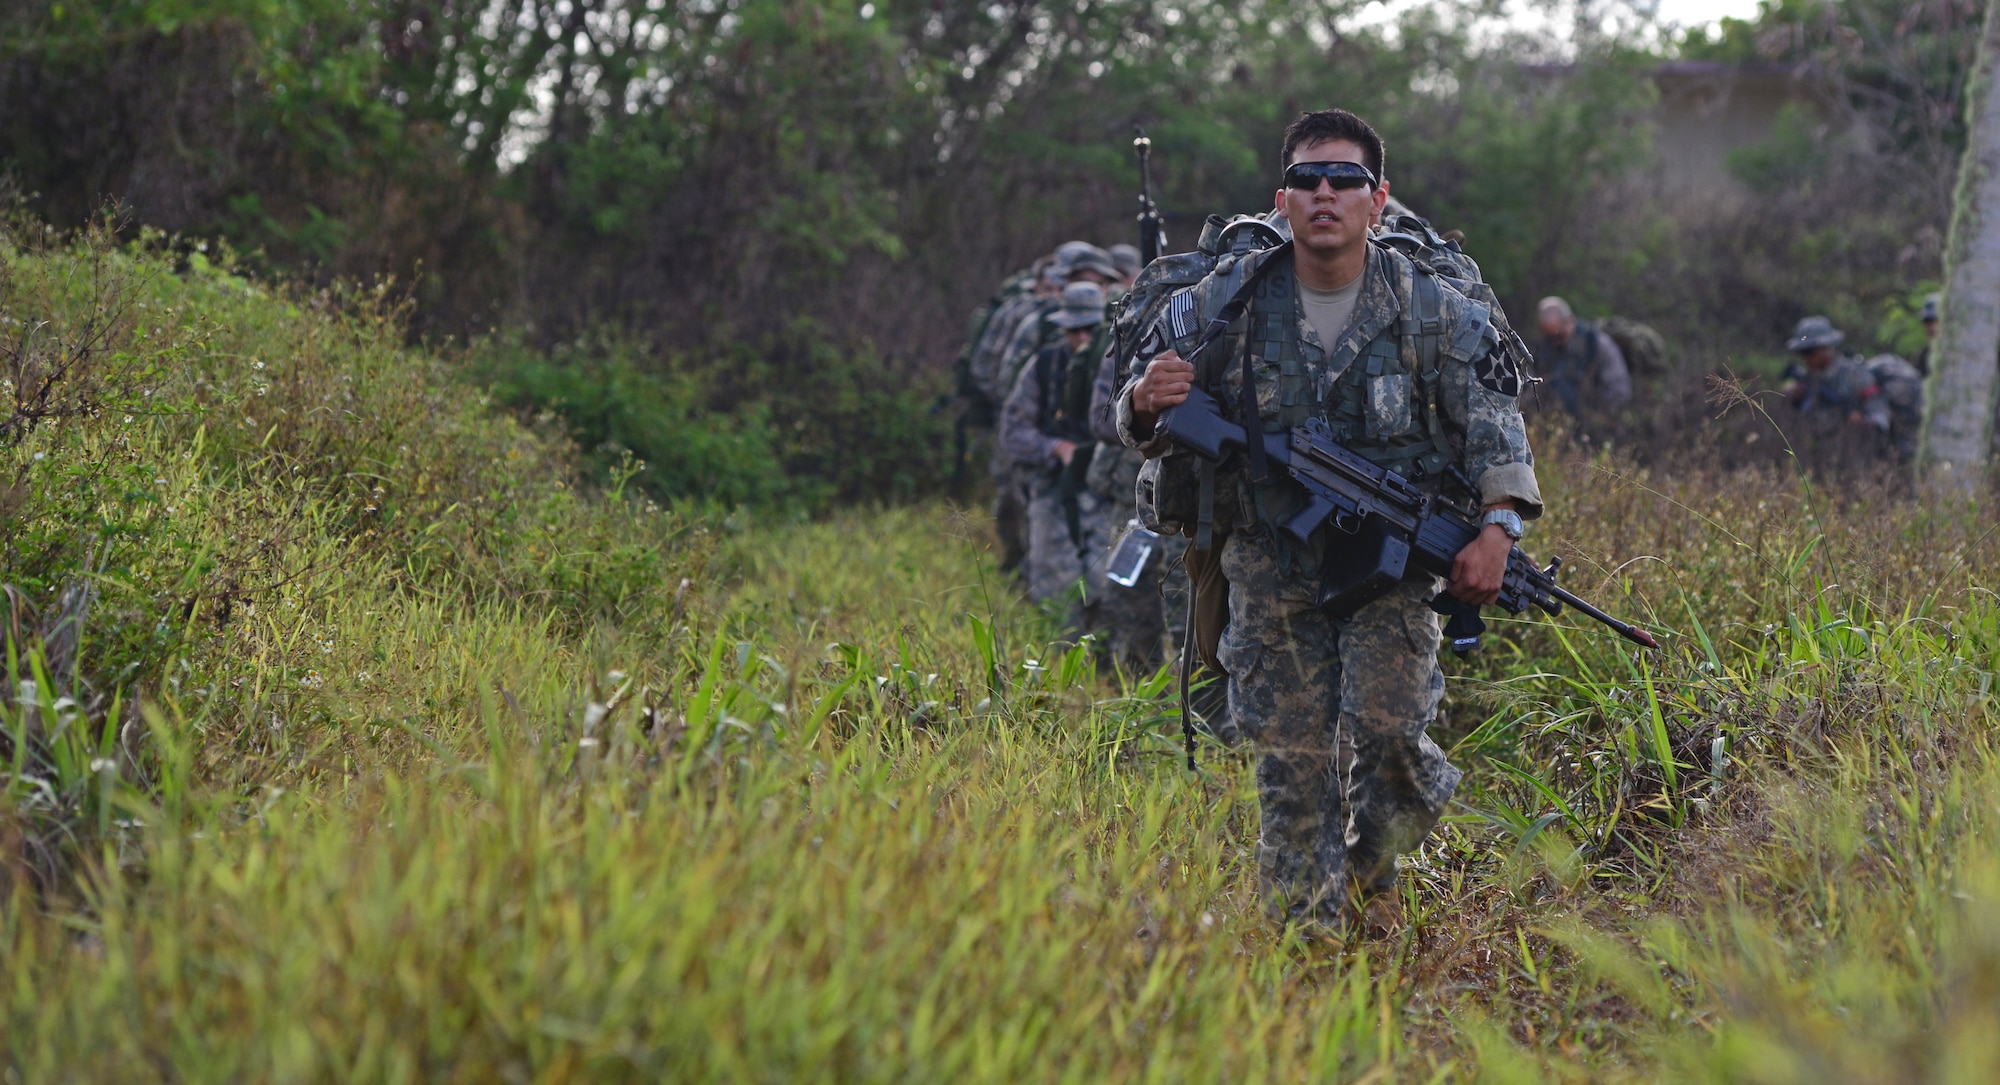 Soldiers and Airmen ruck to an objective point during the Jungle Training Operations Course June 16, 2016, in Barrigada, Guam. Conducted by the U.S. Army 25th Infantry Division's Lightning Academy Jungle Operations Training Center from Schofield Barracks, Hawaii, and supported by 736th Security Forces Squadron Commando Warrior cadre, students prepared a simulated patient for medical evacuation. During the course, they also learned survival skills, including land navigation and evasion techniques. (U.S. Air Force photo by Senior Airman Joshua Smoot)